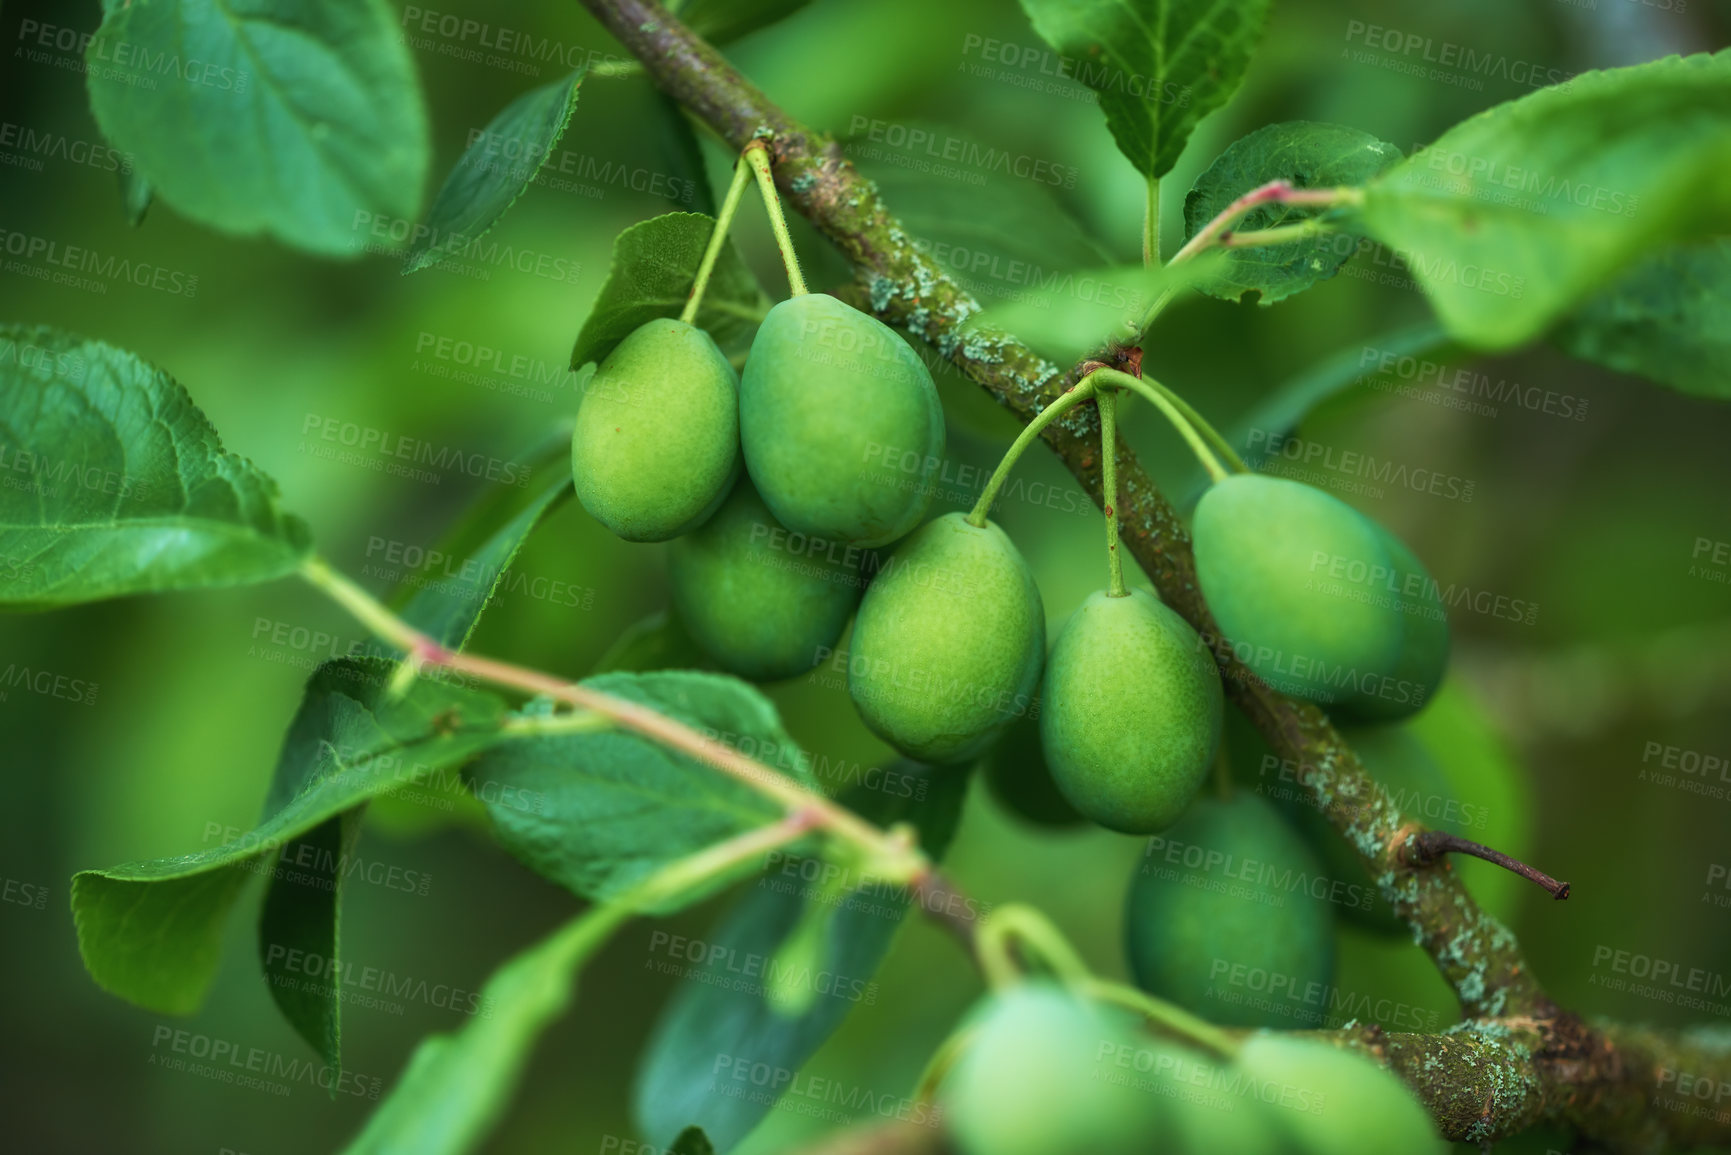 Buy stock photo Closeup of European plums growing on a tree in a garden with bokeh. Zoom in on details of many green round fruit hanging on a branch in harmony with nature. Shapes and patterns in a calm, zen forest